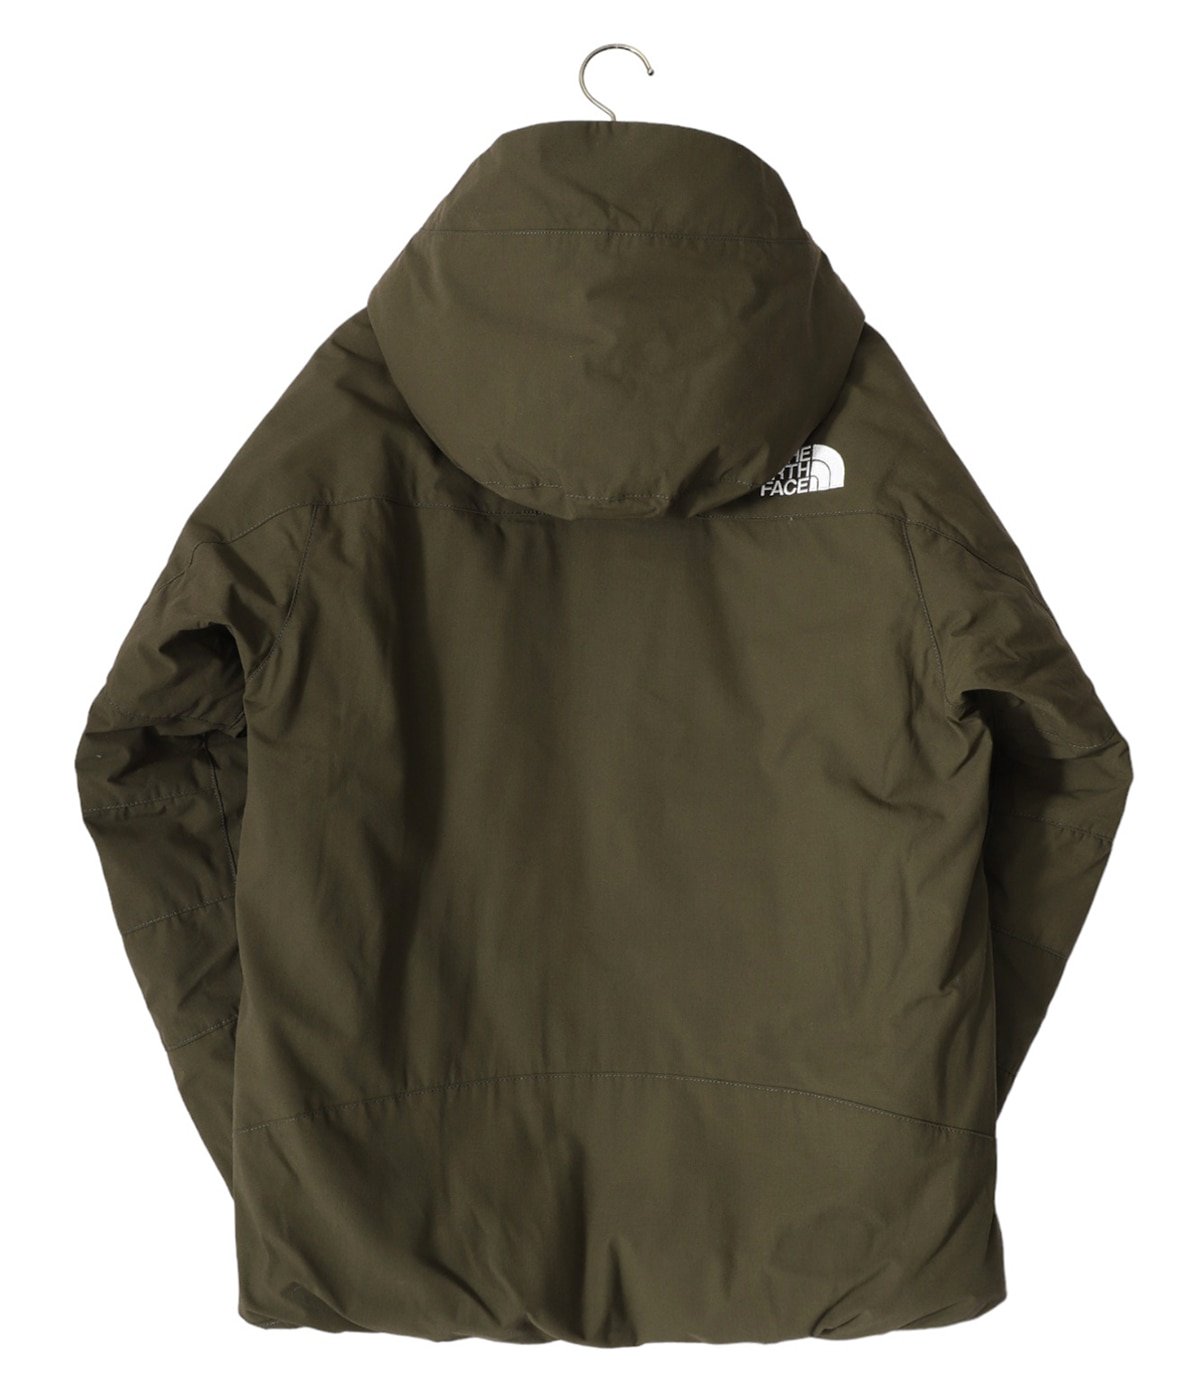 Firefly Insulated Parka | THE NORTH FACE(ザ ノースフェイス 